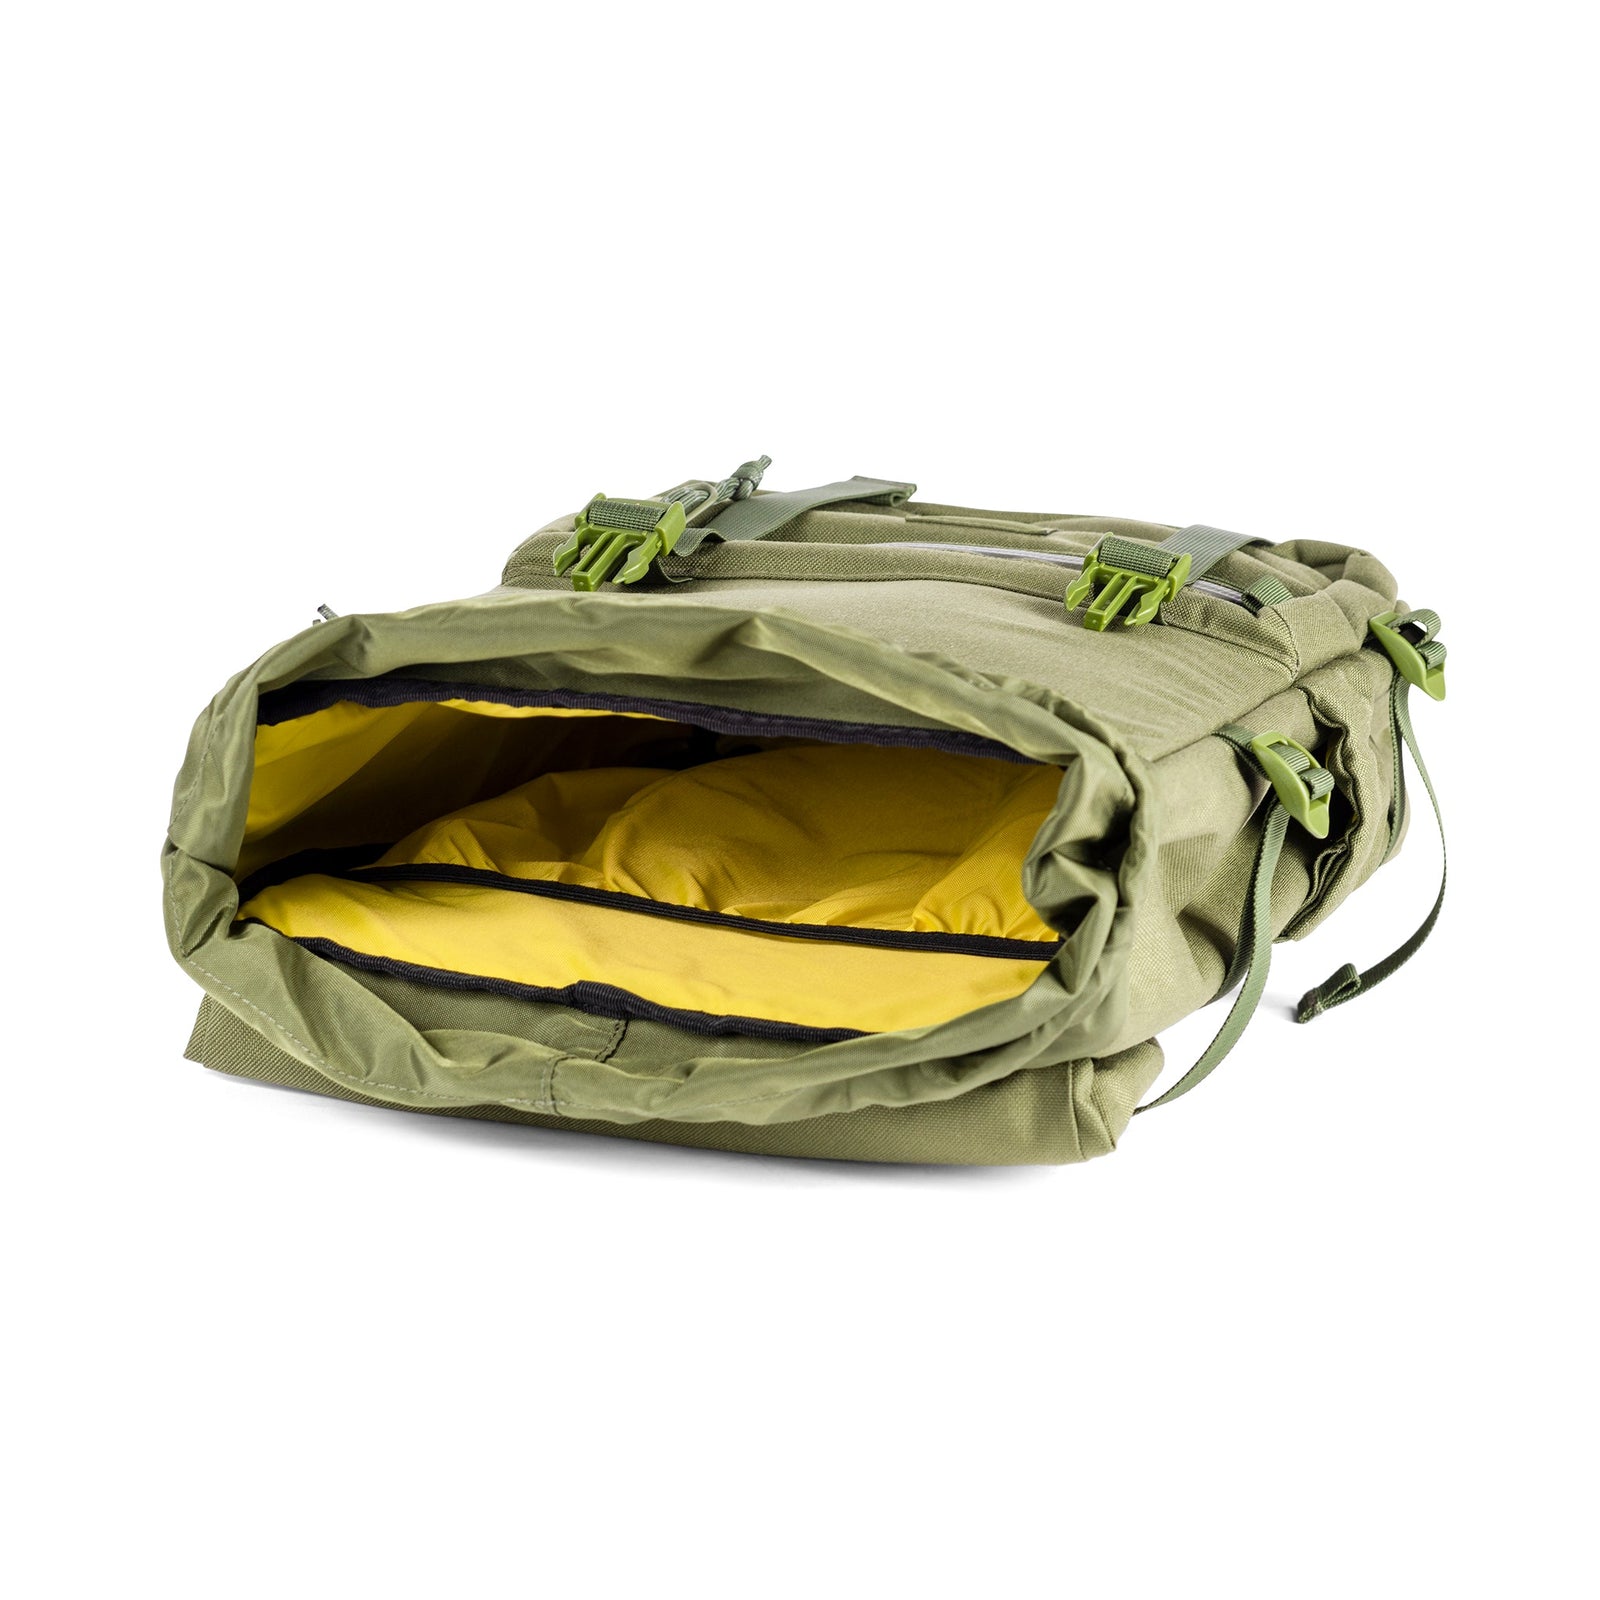 Detail Shot of the Topo Designs Rover Pack Tech in "Olive" green showing yellow inside and laptop sleeve